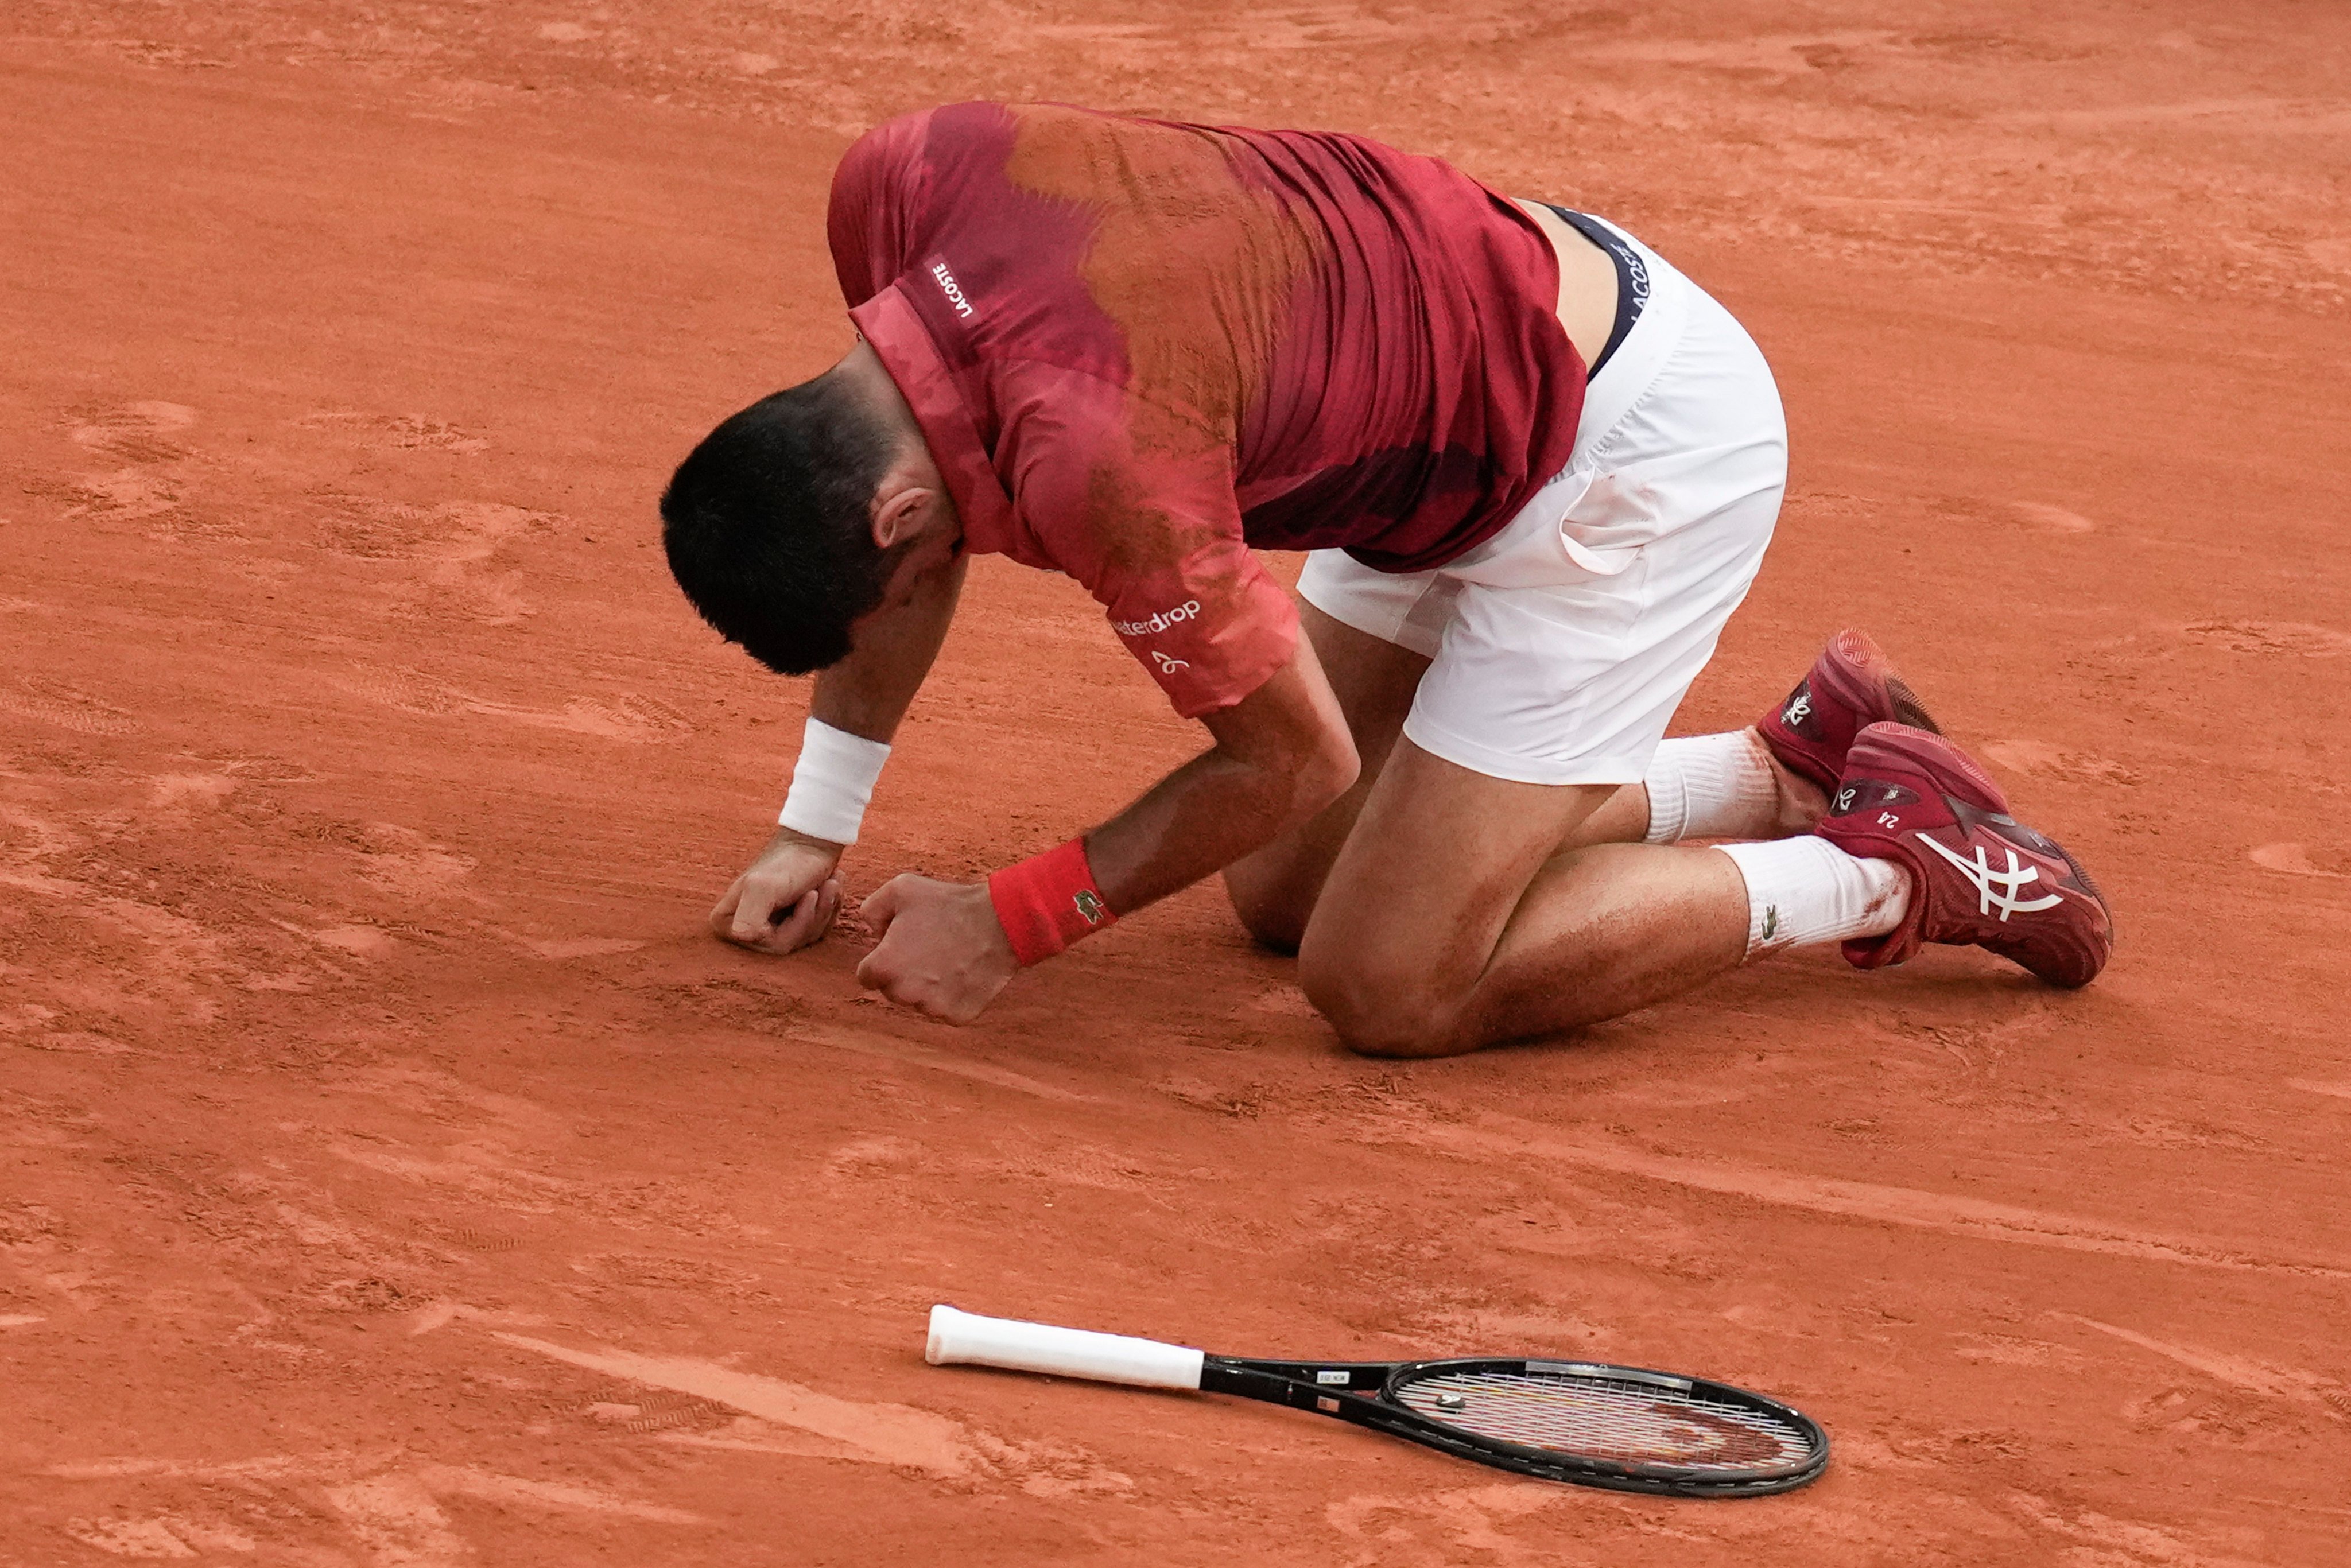 Serbia’s Novak Djokovic withdrew from the French Open with an injured right knee on Tuesday, ending his title defense and meaning he will relinquish the No. 1 ranking. Photo: AP